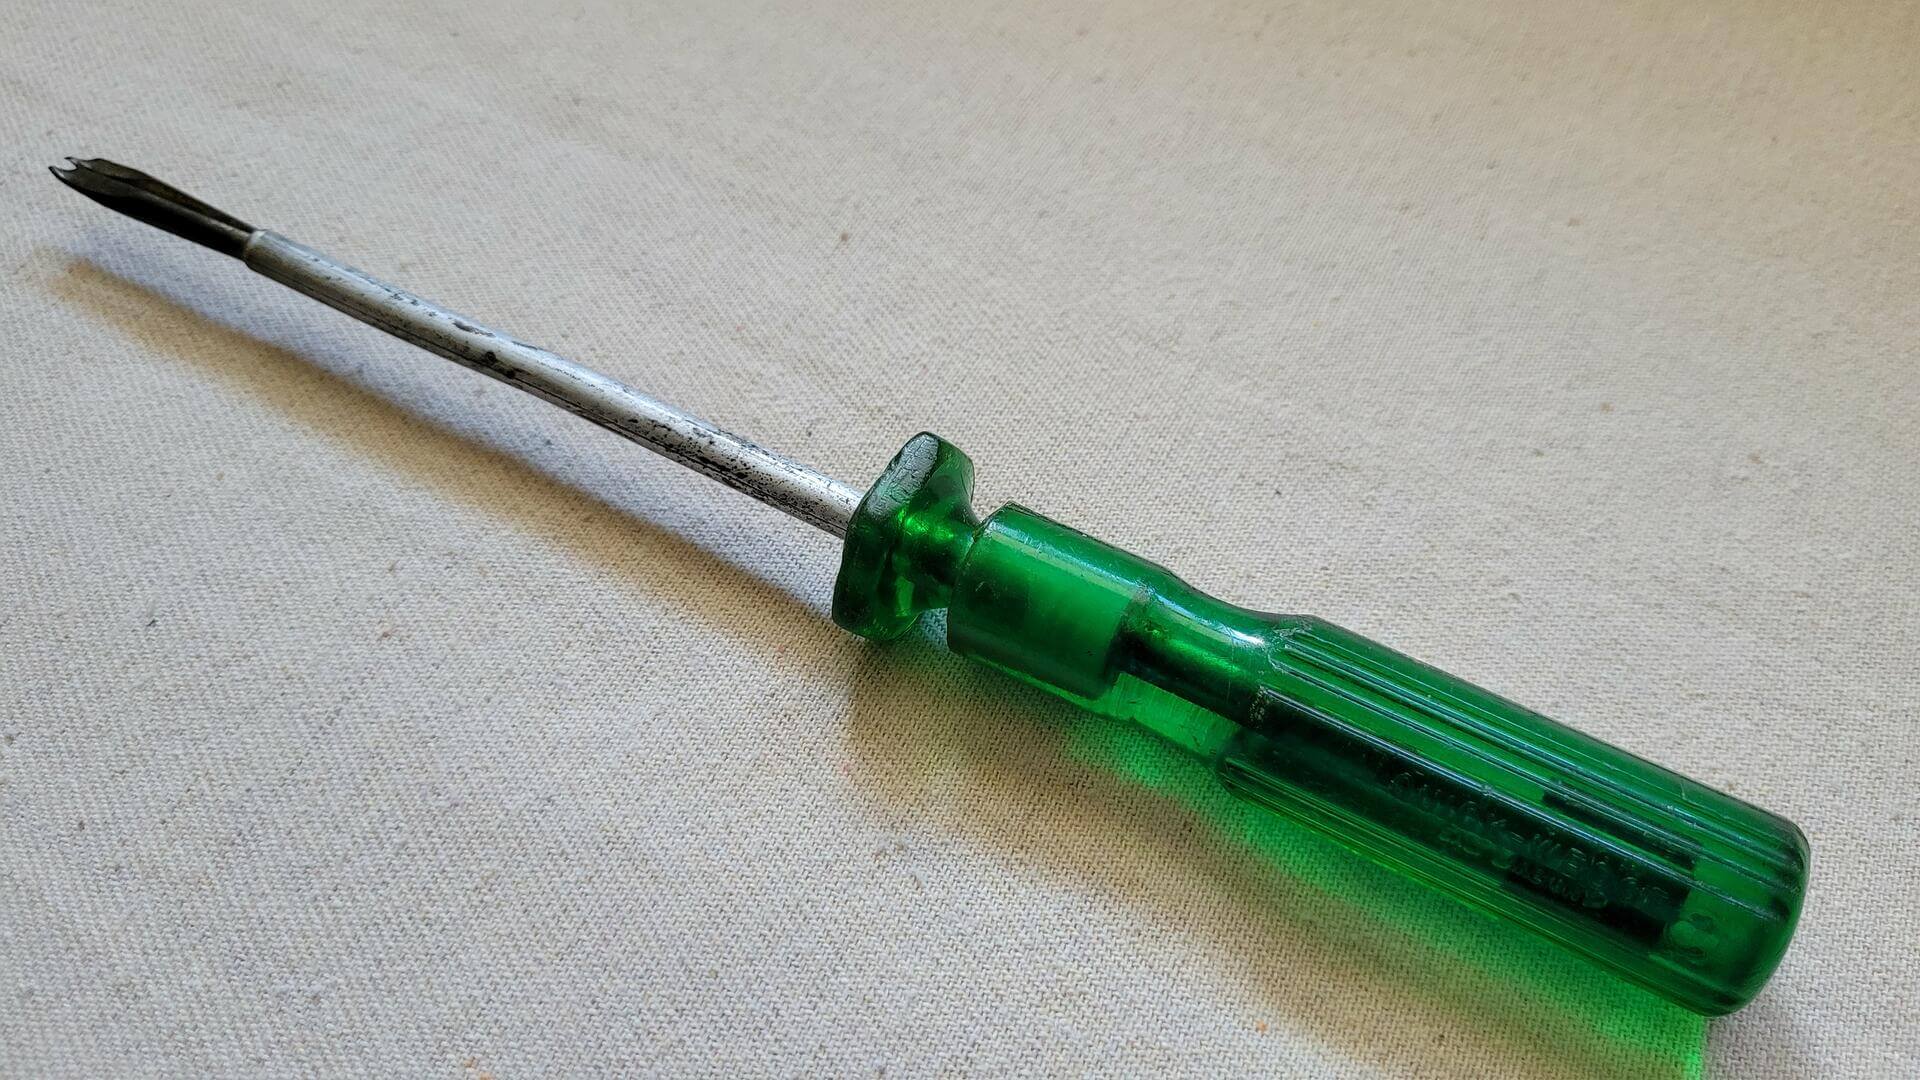 Rare vintage Quick-Wedge No. 1836 screw holding slot screwdriver 10 inches long and green handle. Antique Salt Lake City Kedman Company made in USA collectible hand tools